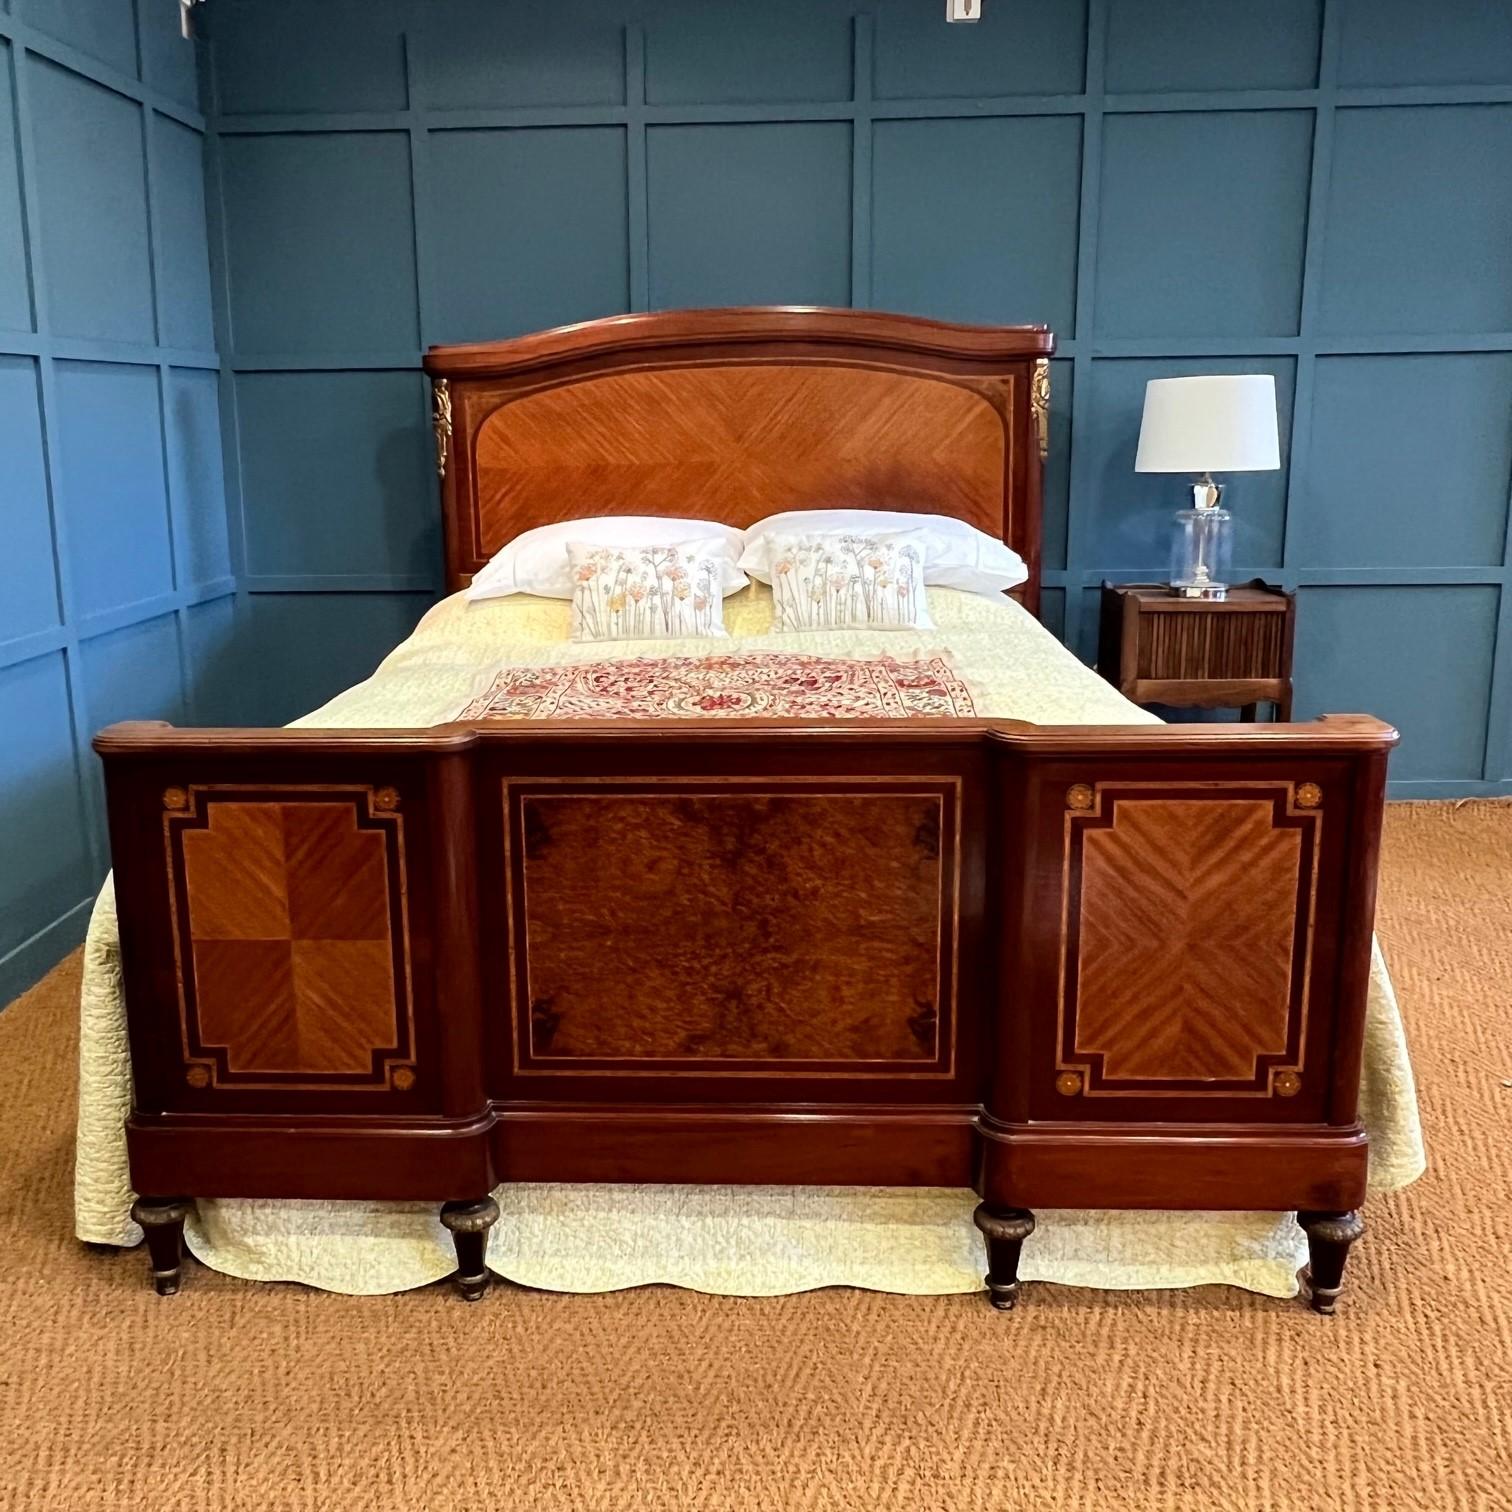 Handsome King size French bedstead with burr walnut central panel marquetry and fruitwood frames encompasses further marquetry on the foot end. The bed head has central marquetry edged with ormulu gilded bronze decorations. The turned feet are edged